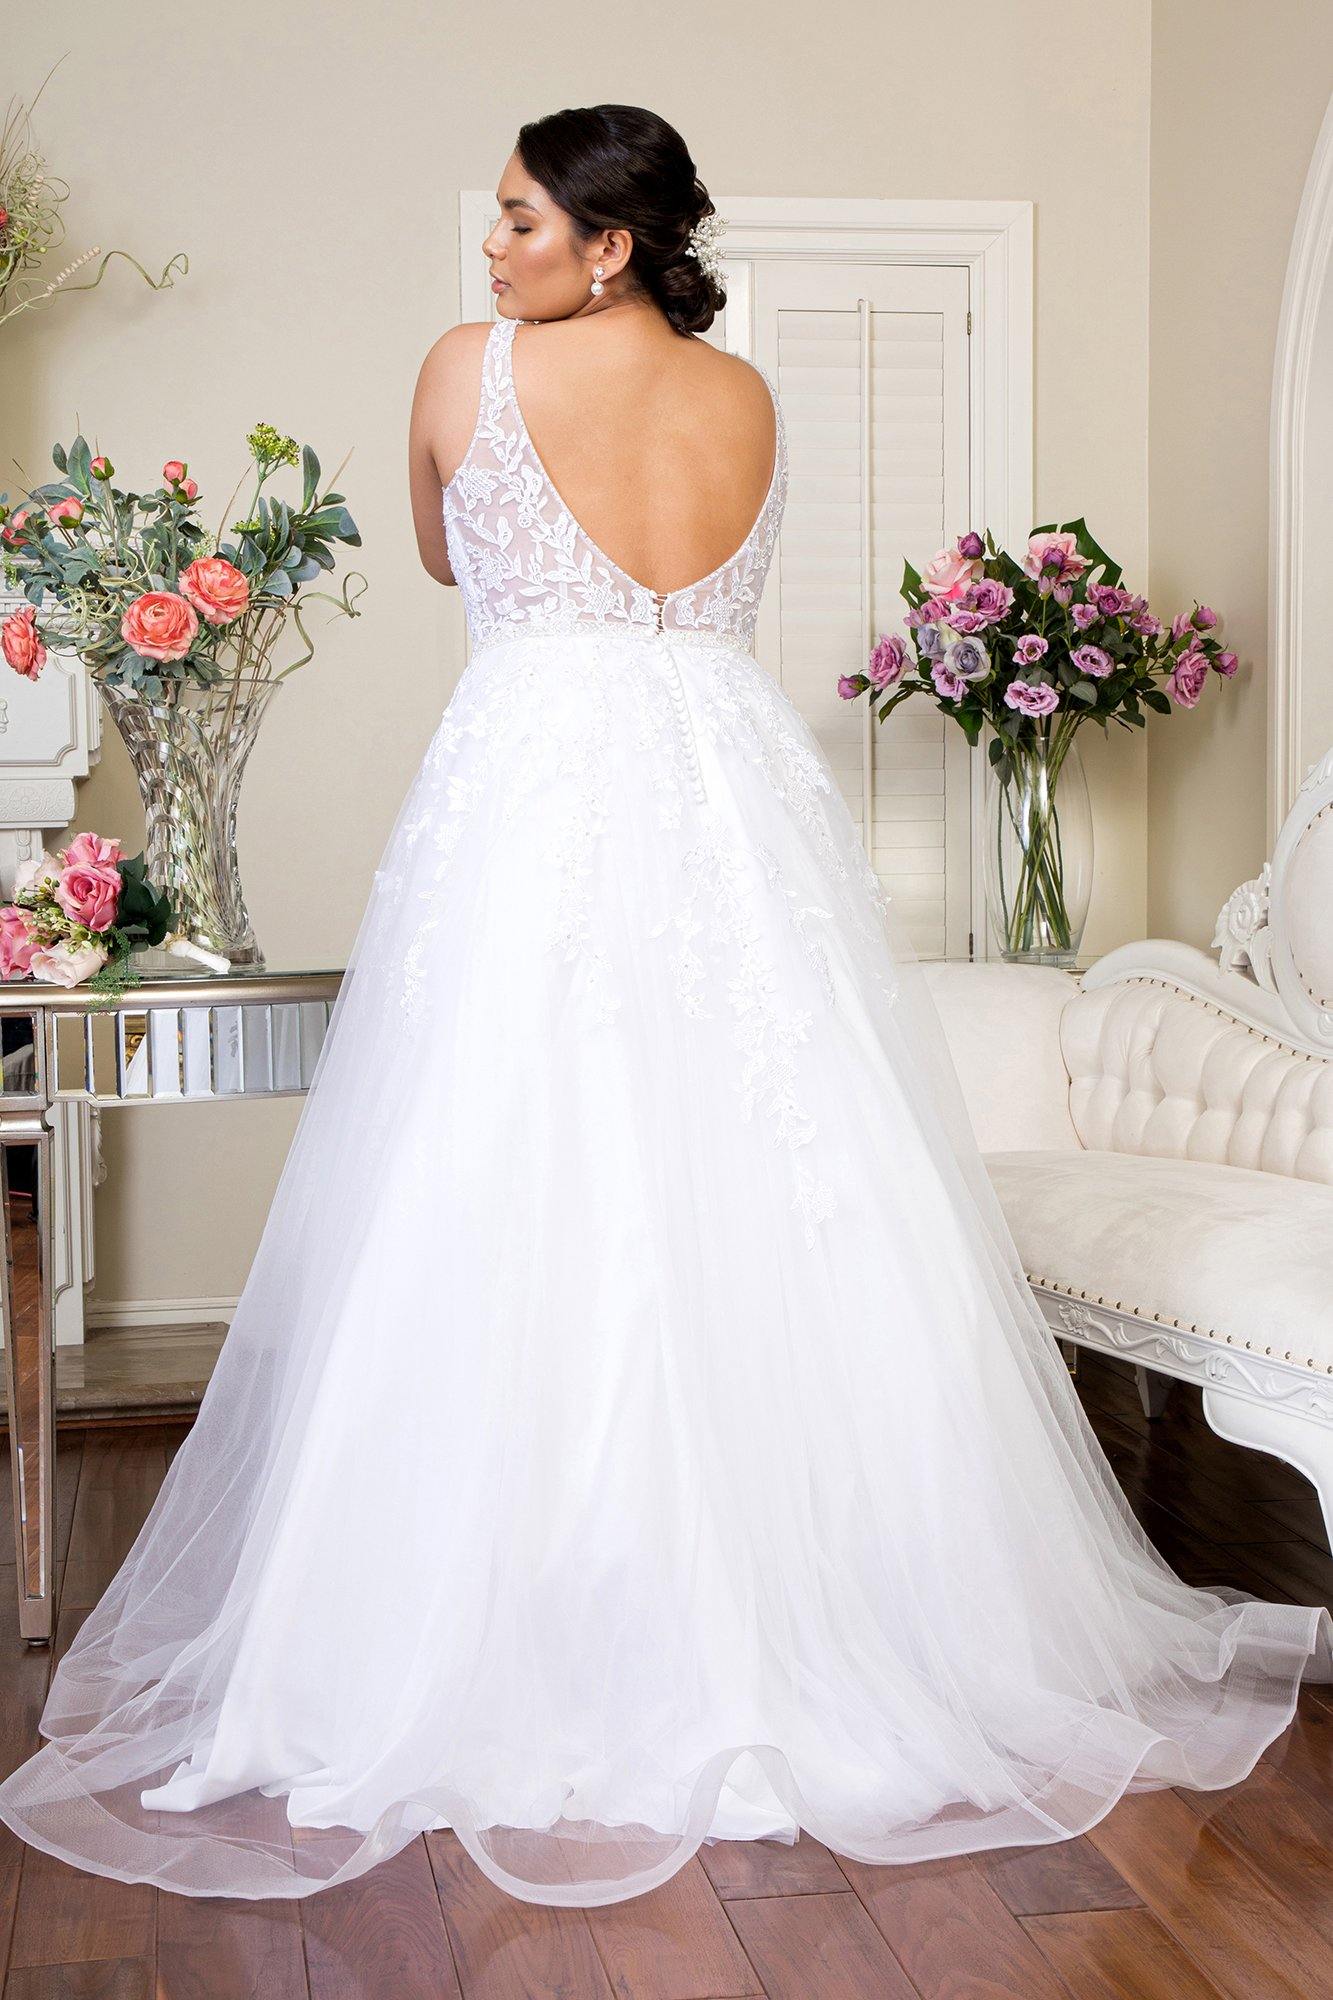 Long Sleeveless Embroidered Mesh Wedding Dress - The Dress Outlet